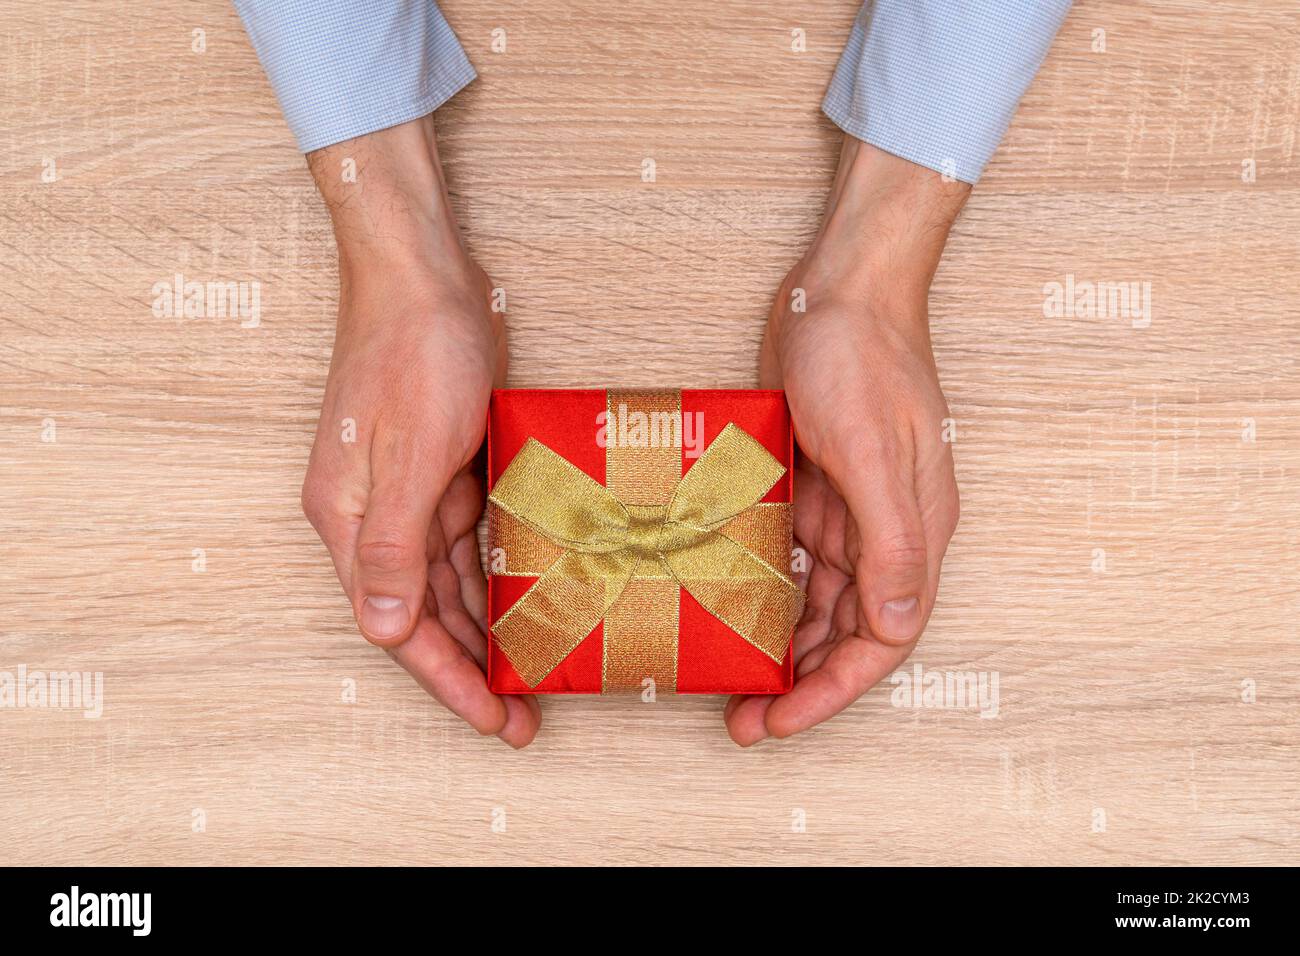 Hands holding gift or present box decorated with gold bow Stock Photo